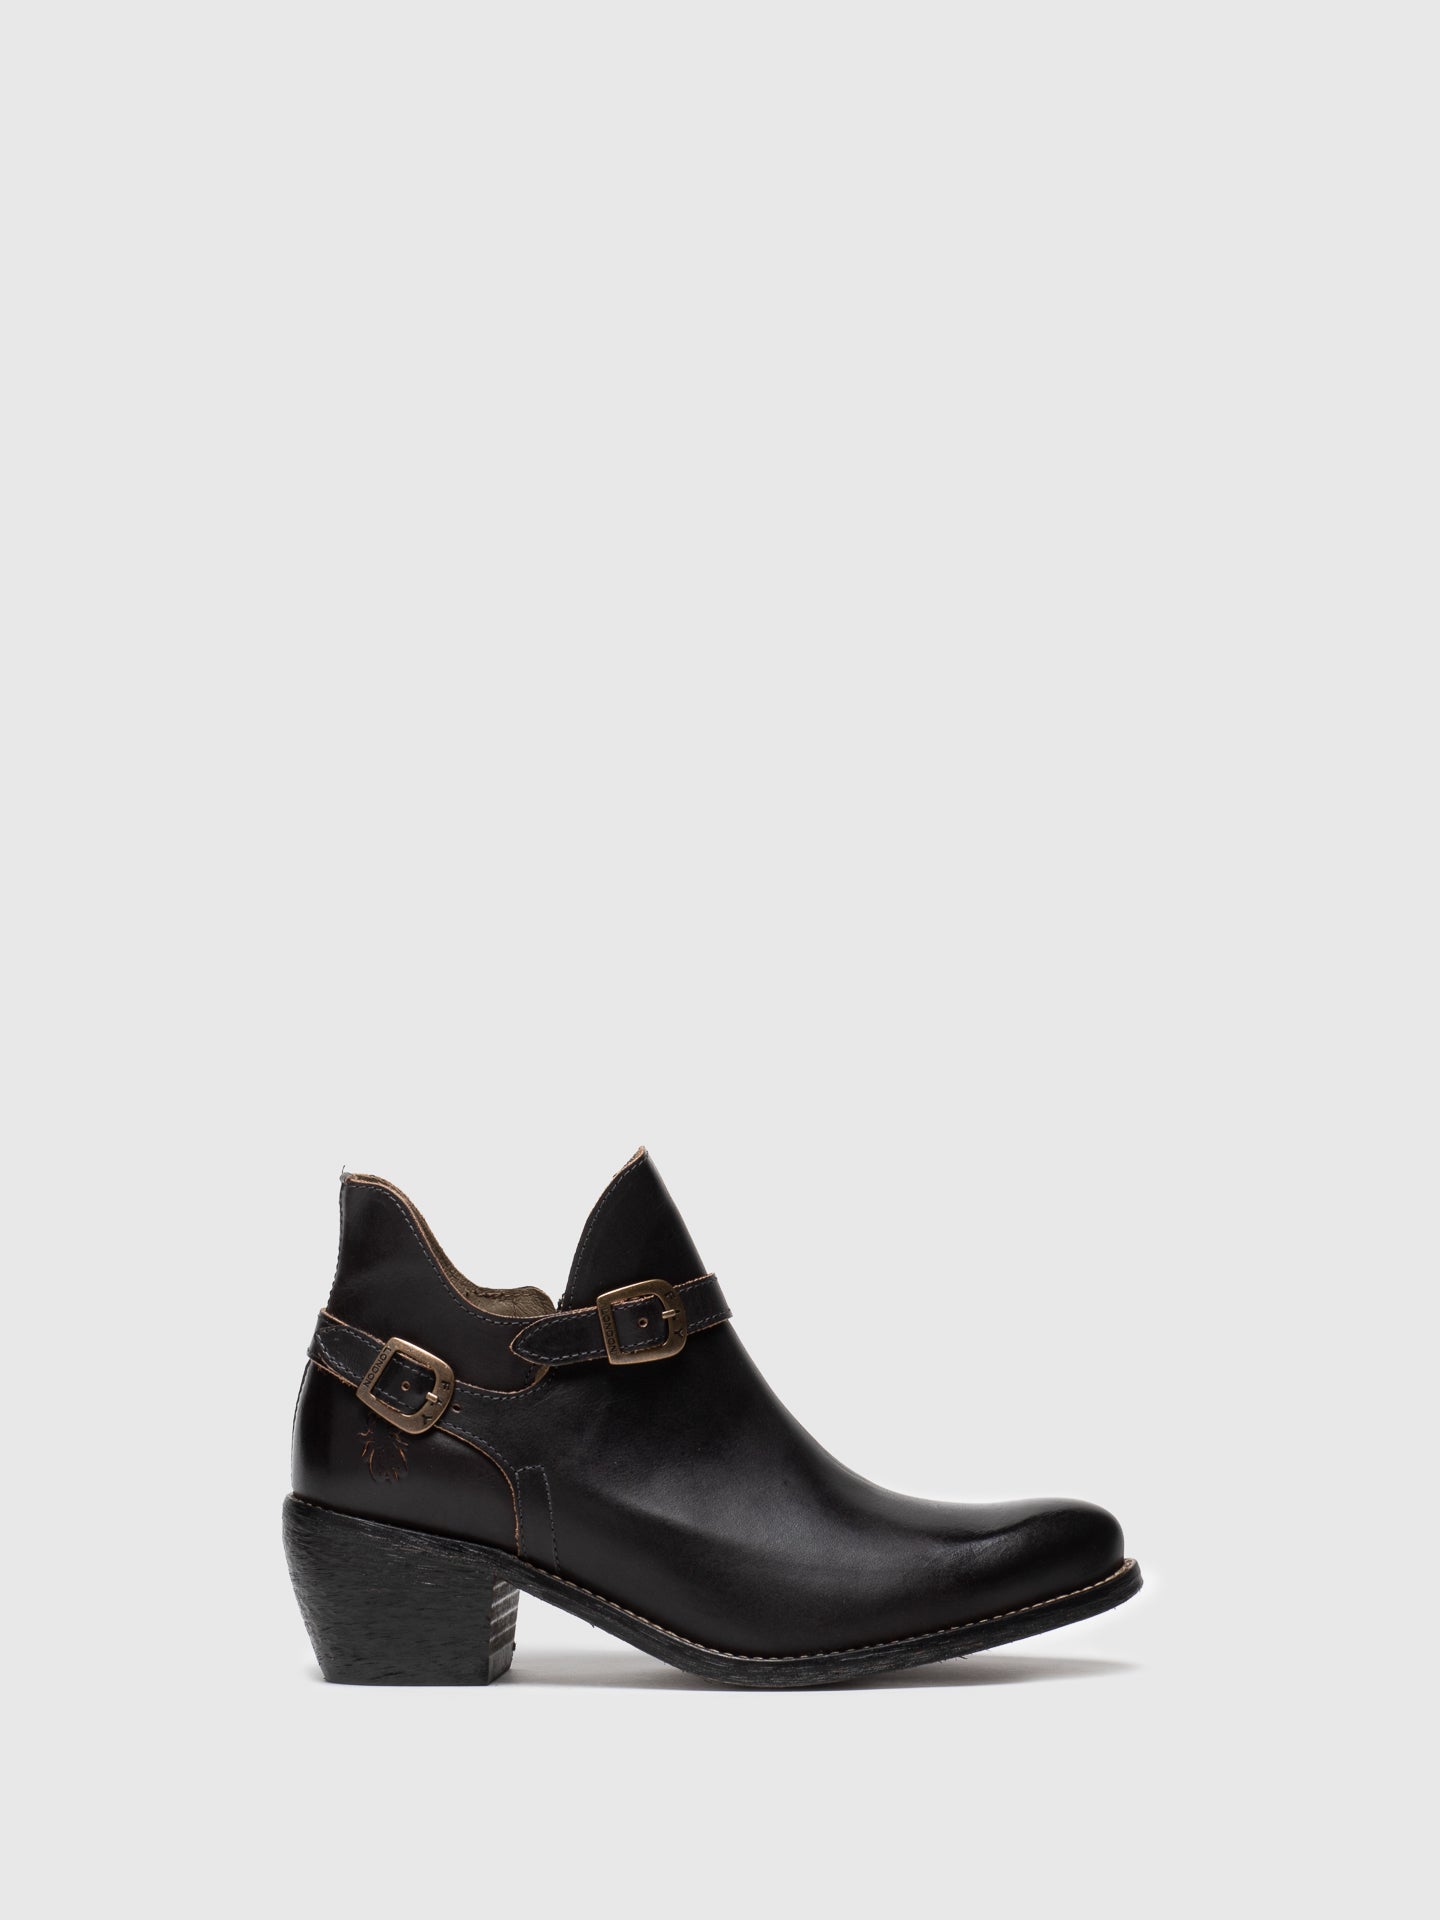 Fly London Black Buckle Ankle Boots